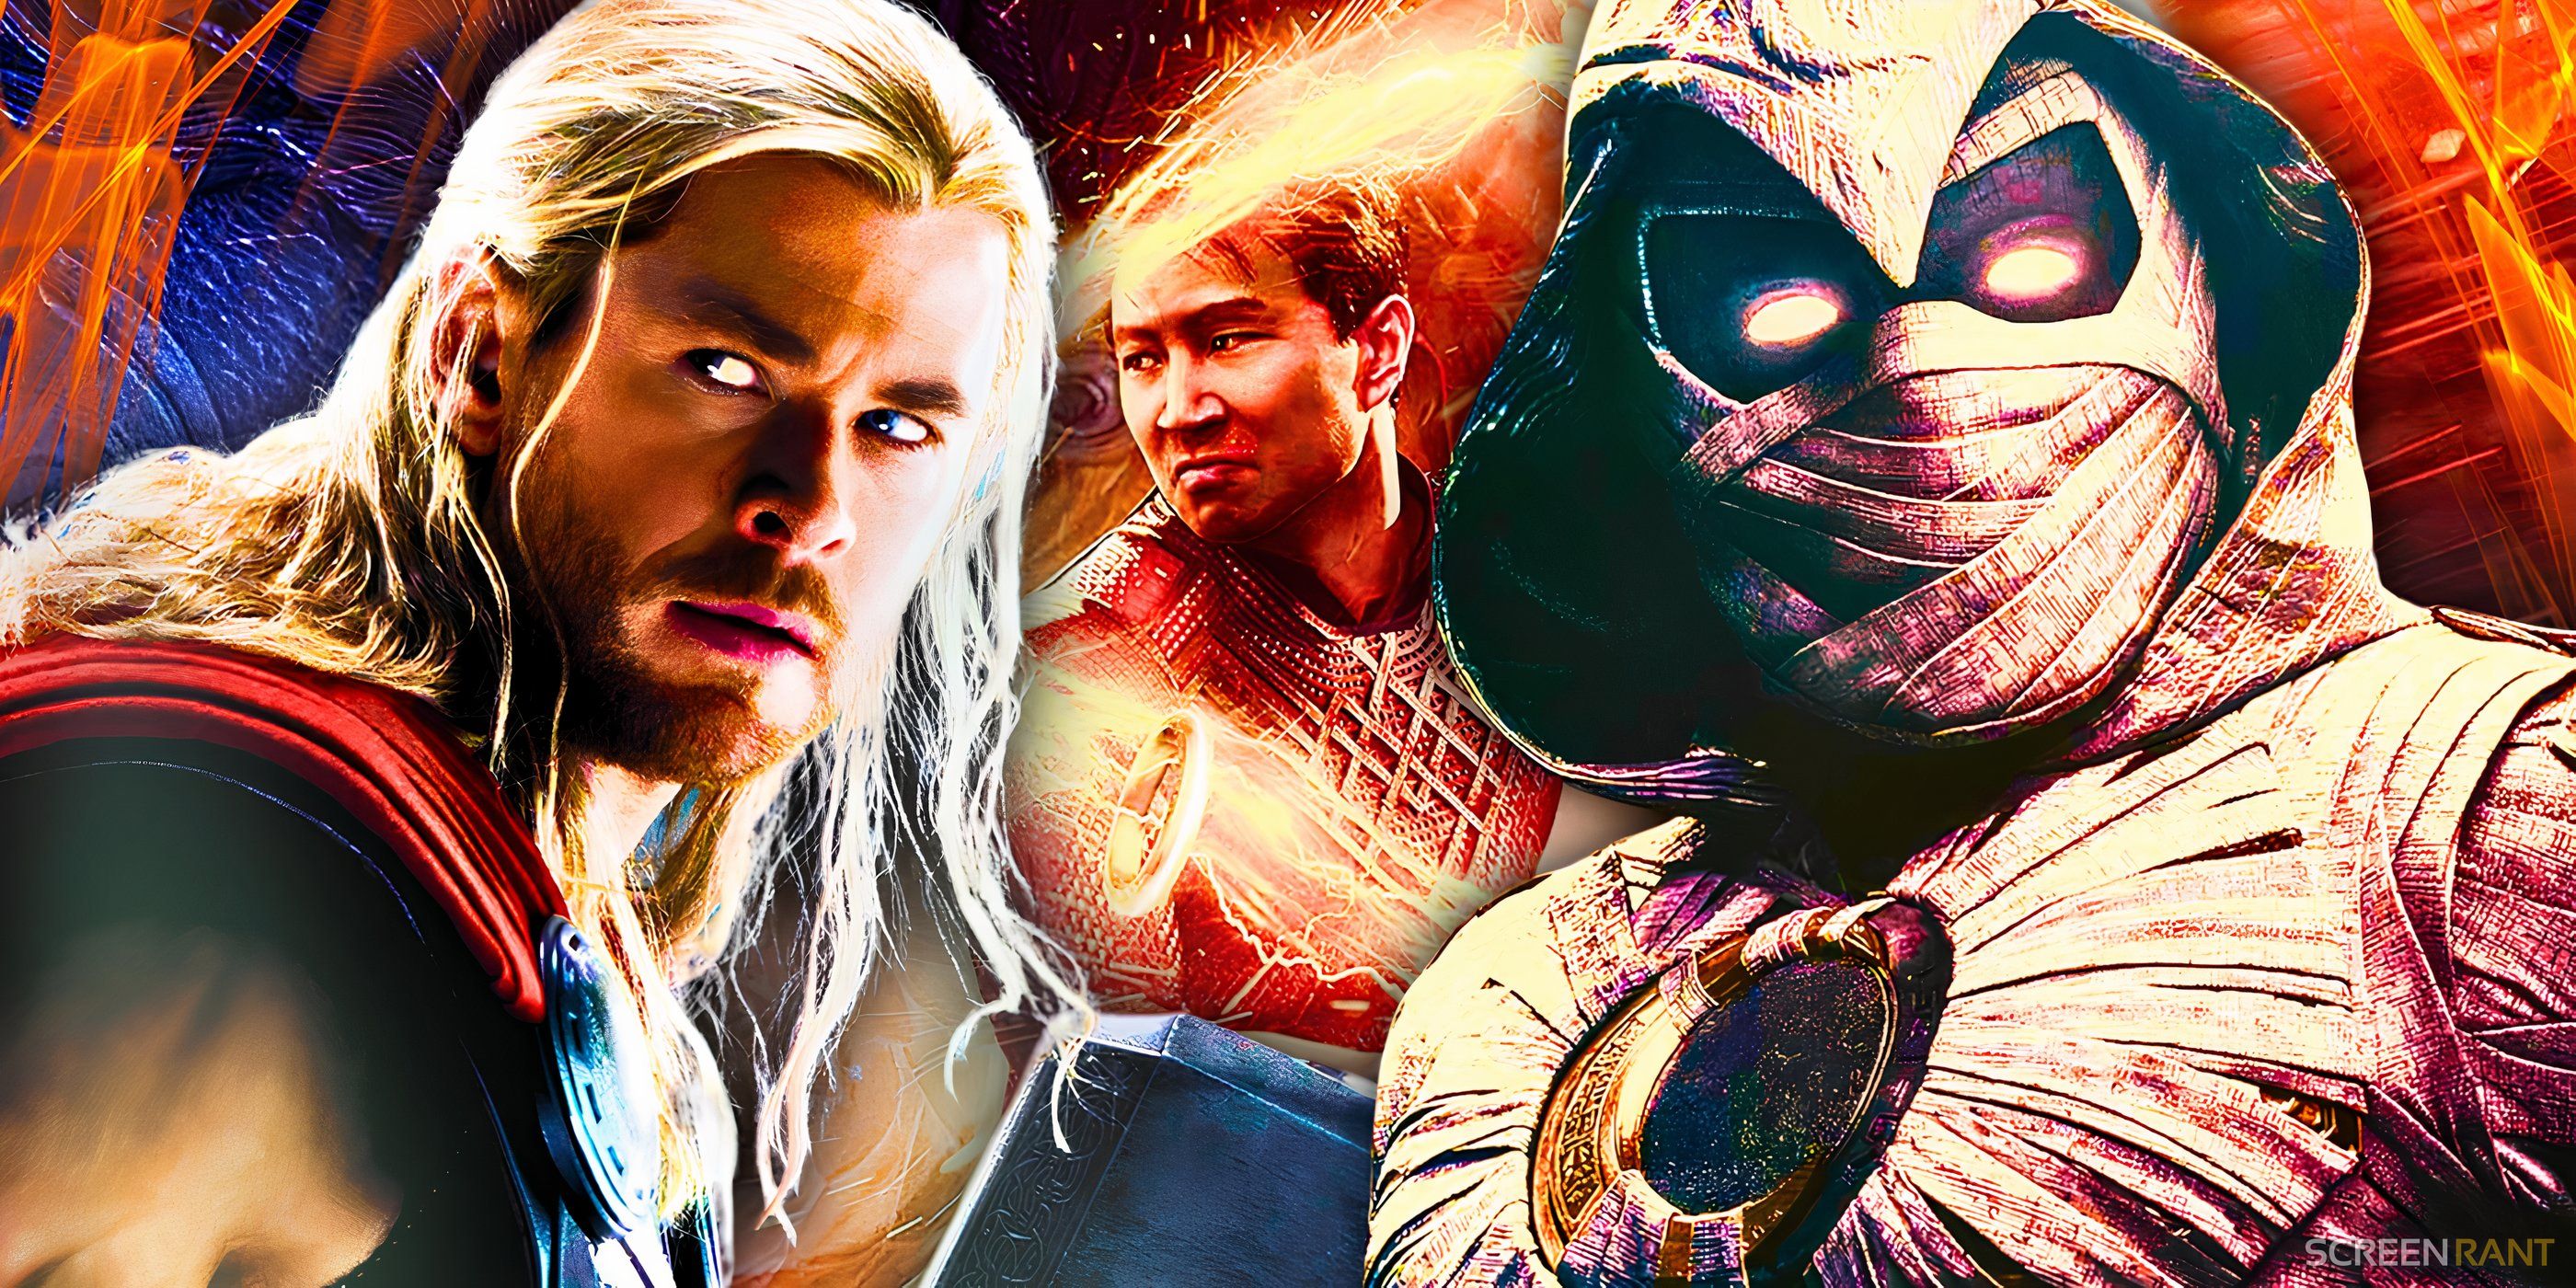 Chris Hemsworth's Thor, Simu Liu's Shang-Chi, and Oscar Isaac's Moon Knight with orange effects in the background